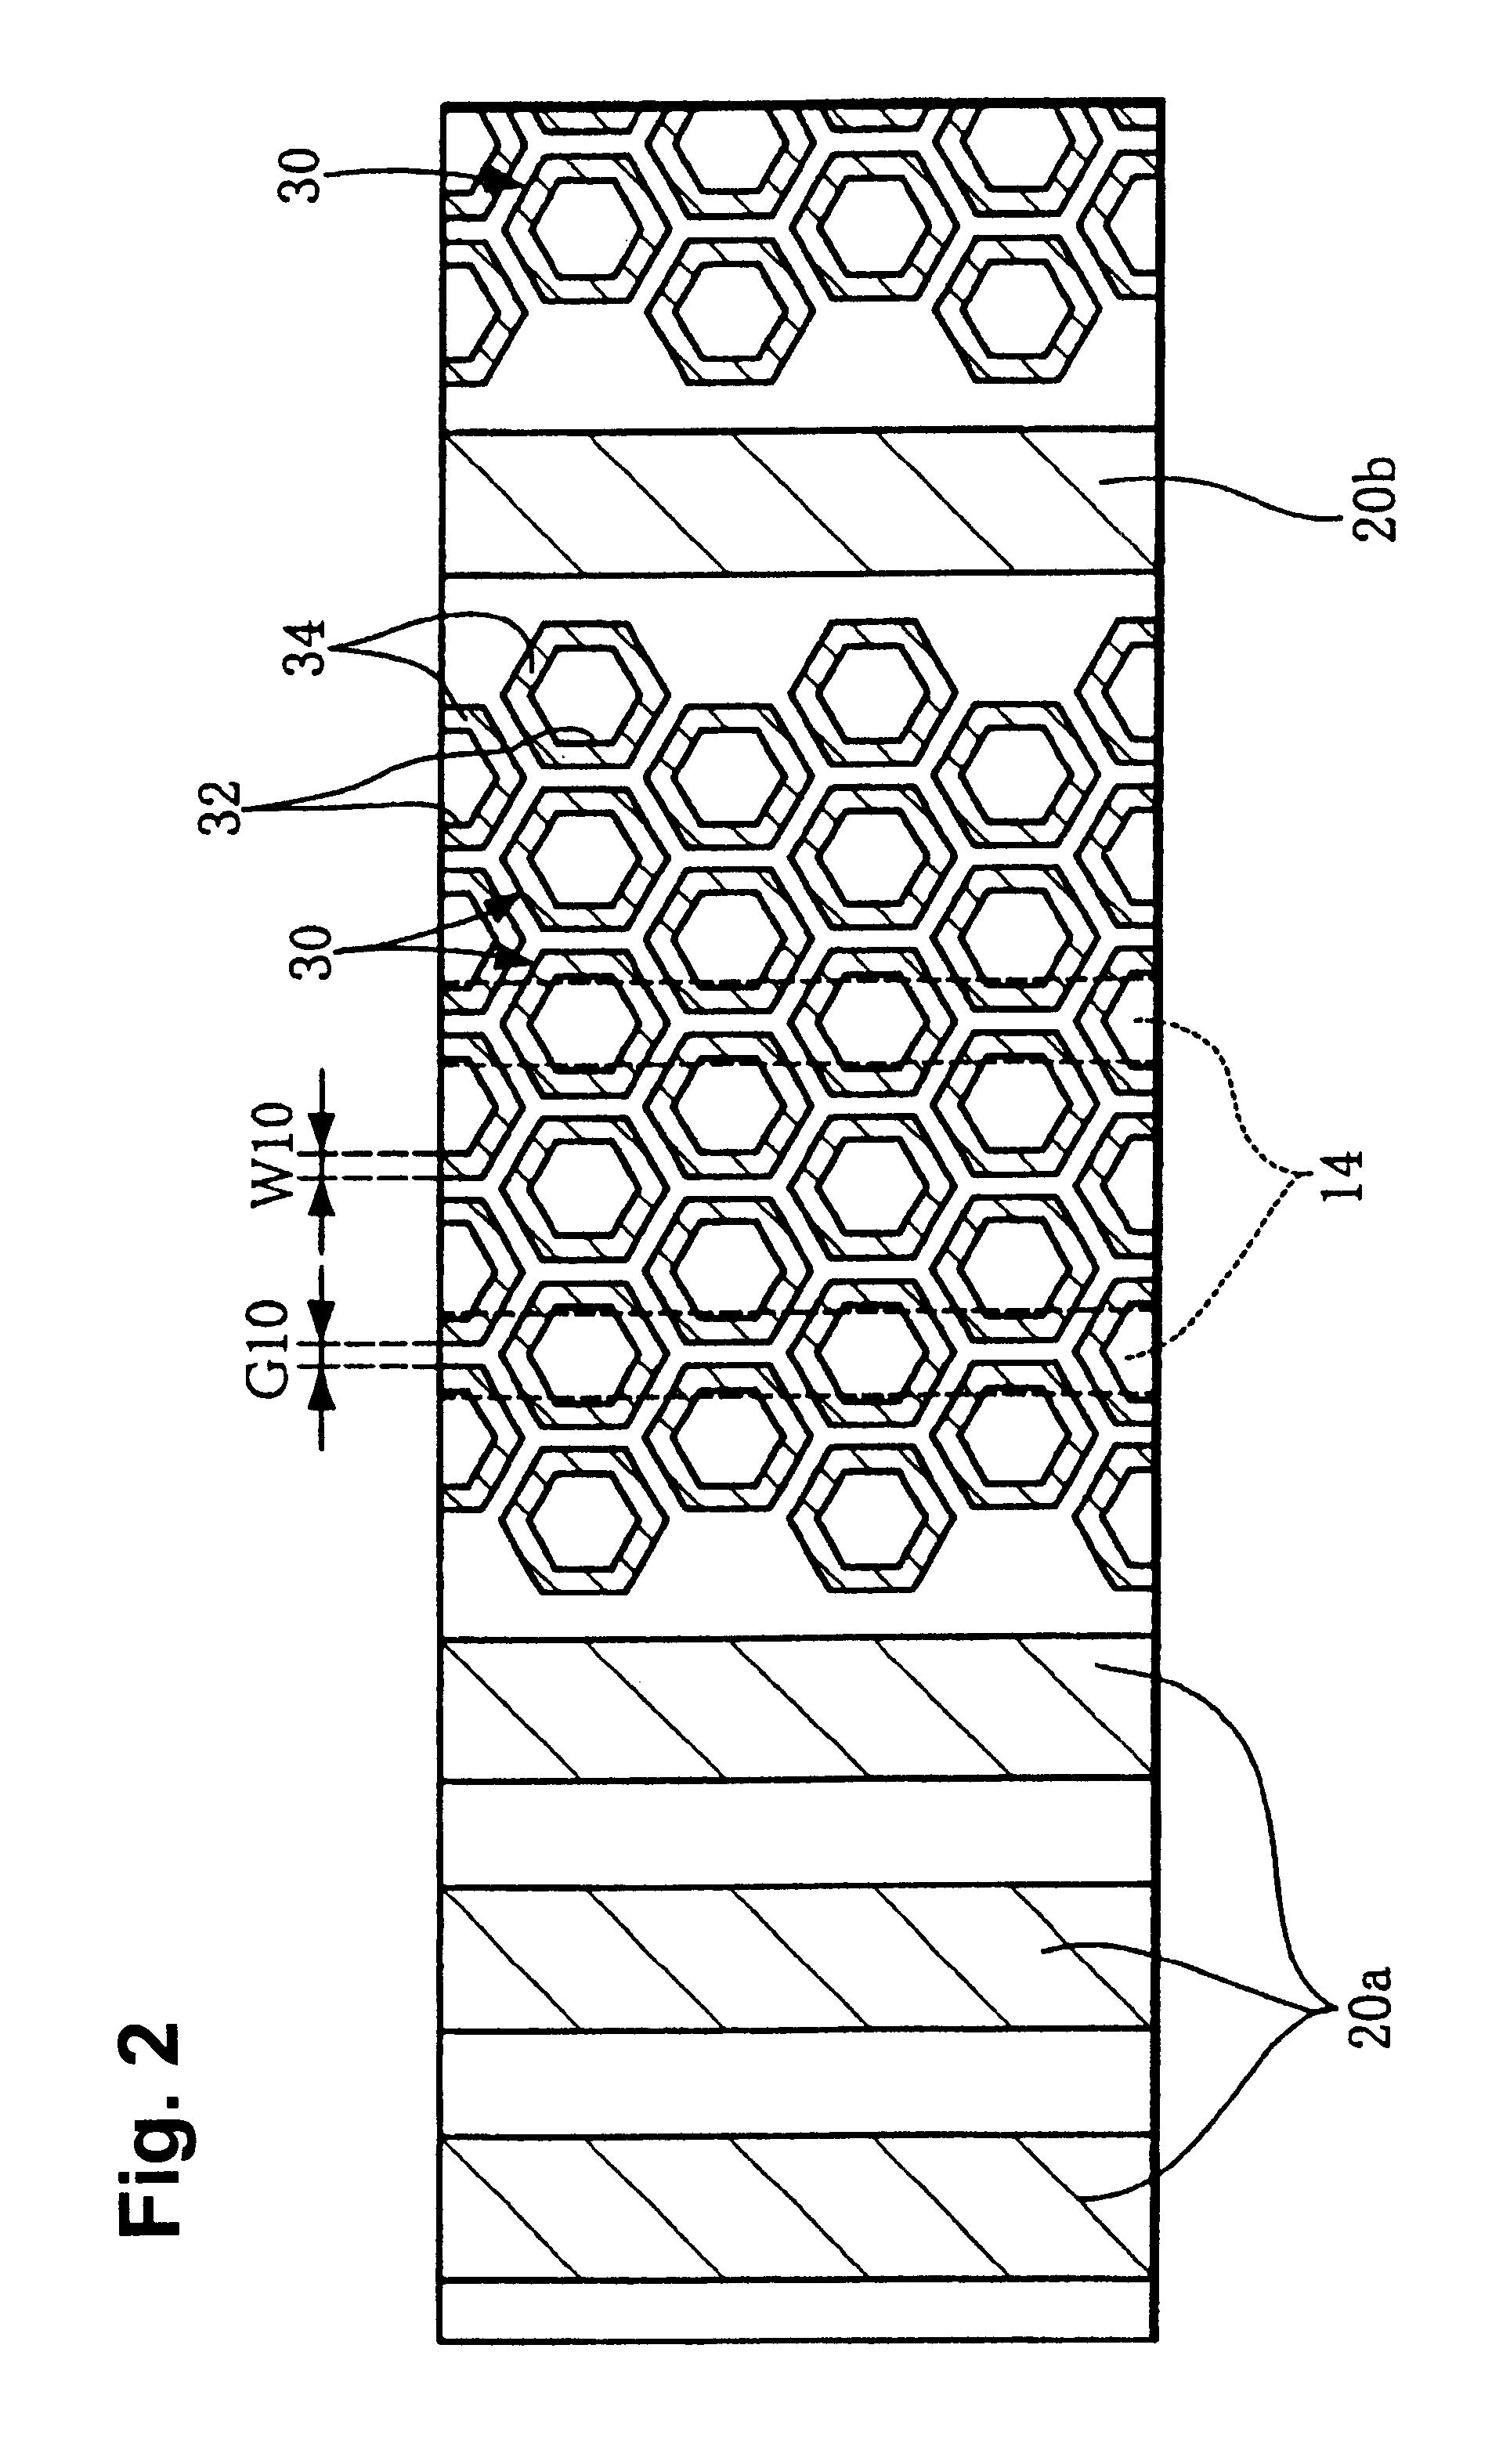 Semiconductor device with dummy wiring layers